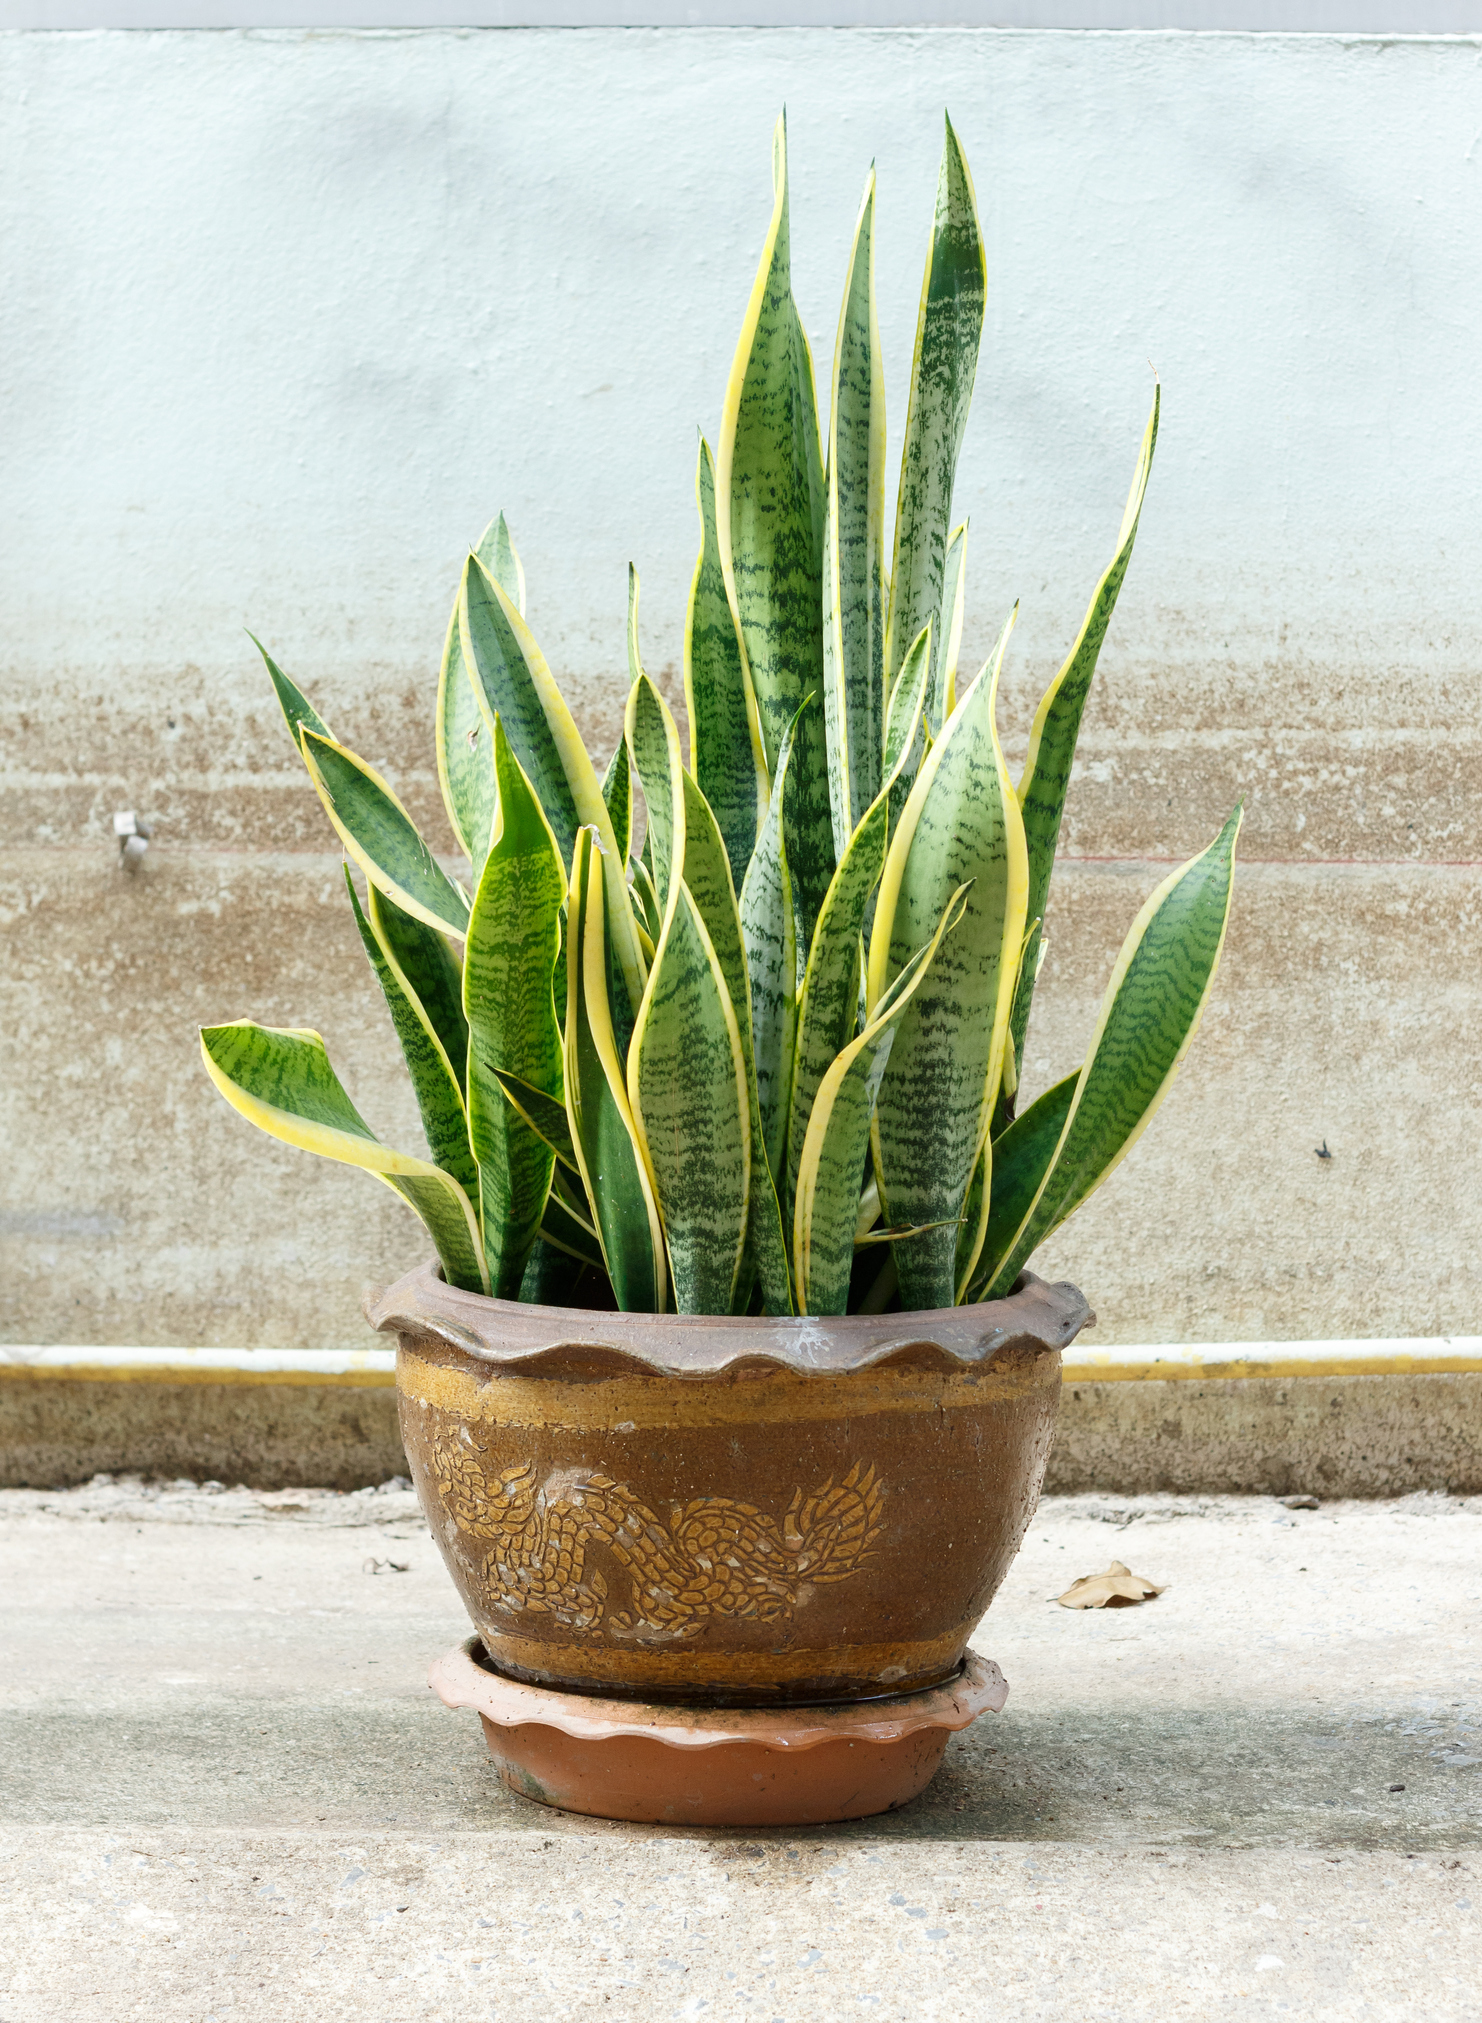 Snake Plant     - Botanical name: Sansevieria trifasciataCare and Feeding: This favorite houseplant is as easy as it gets, and bonus, due to it's upright habit it tucks into corners or beside tables without taking up a lot of space. It thrives on neglect, is listed as one of the top 10 plants for absorbing household toxins, should only be watered when dry (avoid watering the leaves) and fertilized rarely (once during the growing season with an all-purpose plant food). It tolerates bright light (not direct light) but also thrives in very low light. A great plant for bedrooms as it converts CO2 into O2 while we sleep. Height: 3'-4' though there are smaller varieties that only reach a foot tall Pests and Disease: Thrips are the number one pest, causing leaves to twist, and curl inward. Wipe down leaves with a wet cotton ball and remove damaged leaves. Other issues are a result of over or under watering, causing fungal or bacterial problems. 